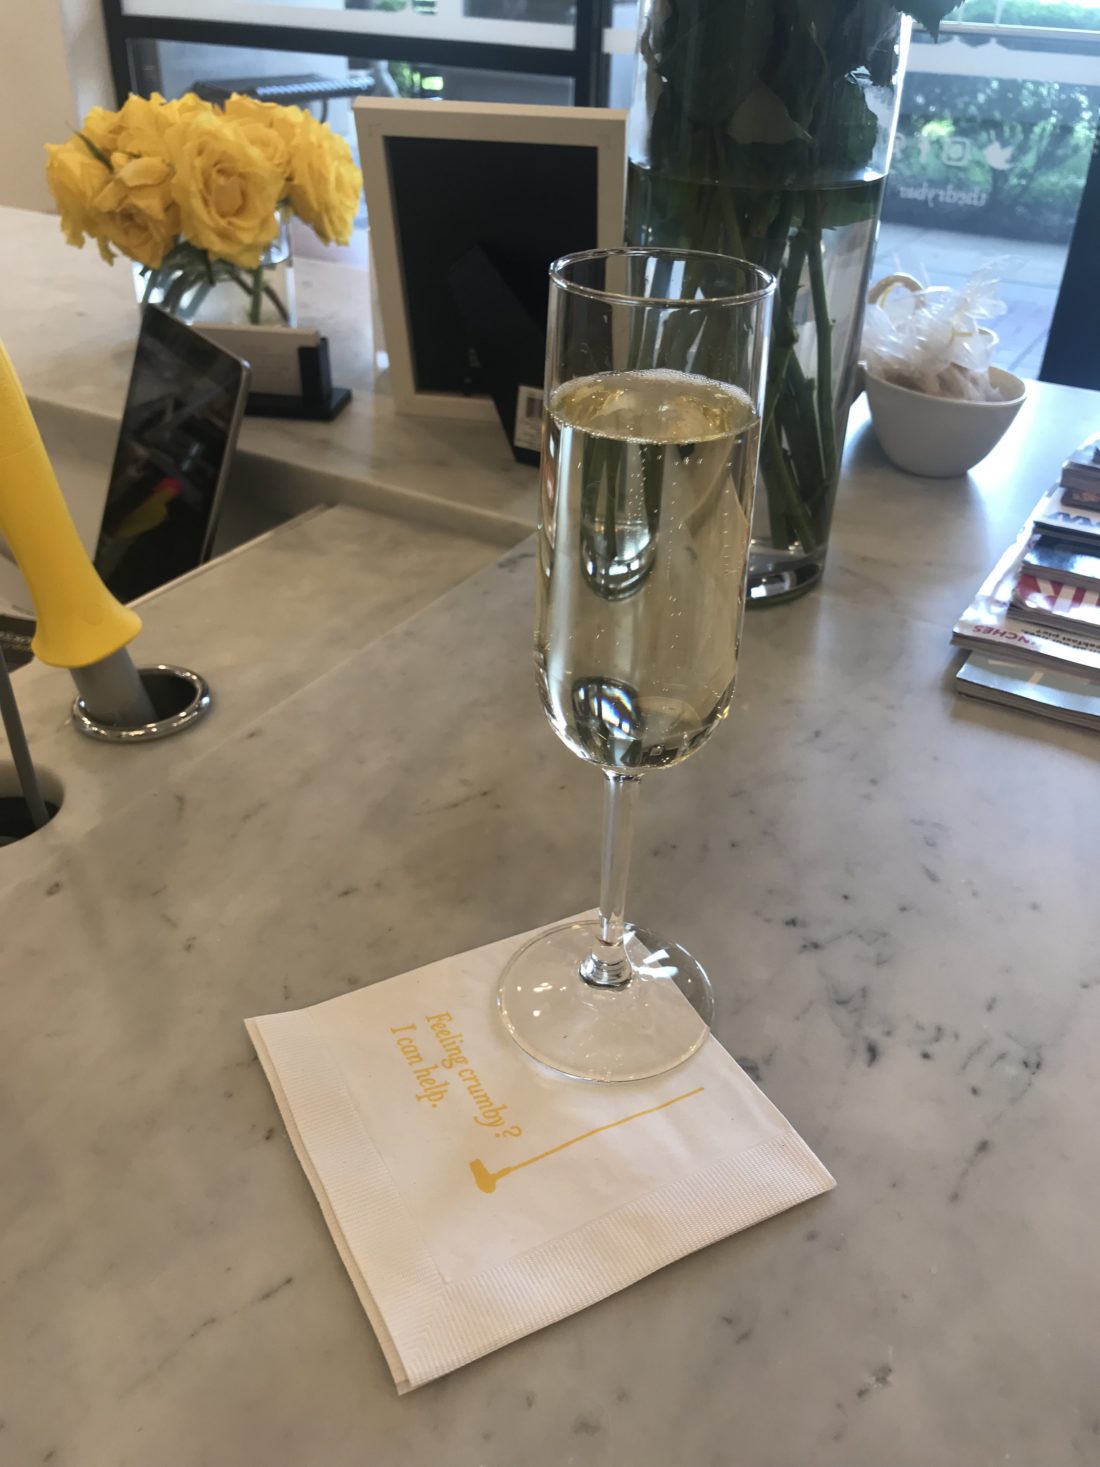 My First Blowout at Drybar| Everything You Need to Know